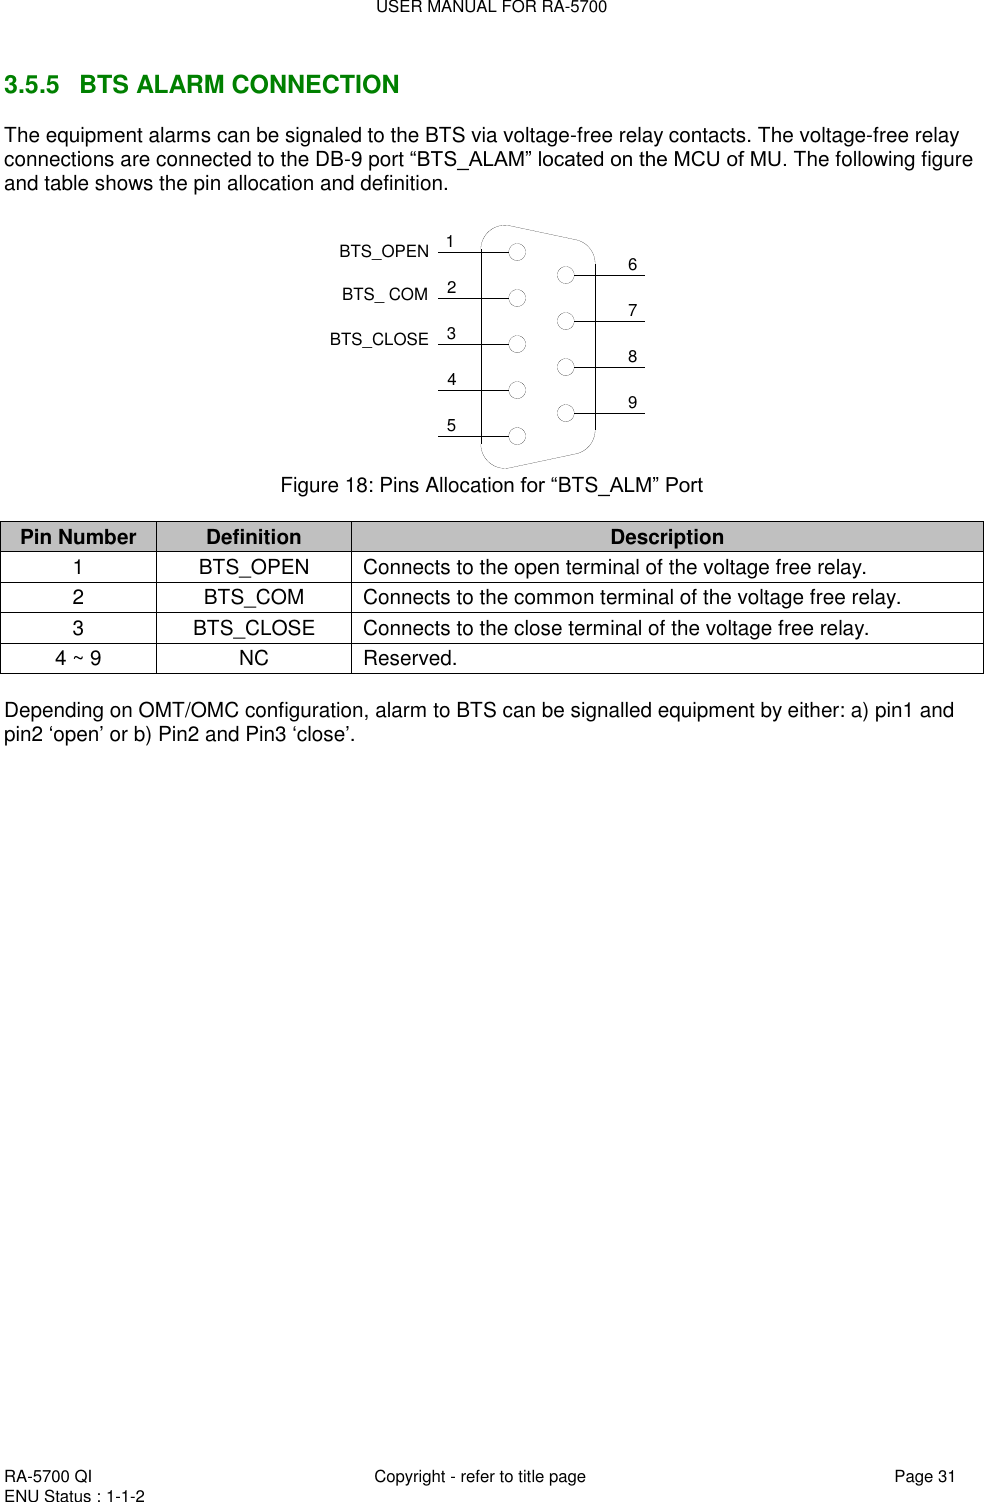 USER MANUAL FOR RA-5700  RA-5700 QI  Copyright - refer to title page Page 31 ENU Status : 1-1-2    3.5.5  BTS ALARM CONNECTION The equipment alarms can be signaled to the BTS via voltage-free relay contacts. The voltage-free relay connections are connected to the DB-9 port “BTS_ALAM” located on the MCU of MU. The following figure and table shows the pin allocation and definition.    124356798BTS_OPENBTS_CLOSEBTS_ COM Figure 18: Pins Allocation for “BTS_ALM” Port  Pin Number Definition Description 1 BTS_OPEN Connects to the open terminal of the voltage free relay. 2 BTS_COM  Connects to the common terminal of the voltage free relay. 3 BTS_CLOSE Connects to the close terminal of the voltage free relay. 4 ~ 9 NC Reserved.  Depending on OMT/OMC configuration, alarm to BTS can be signalled equipment by either: a) pin1 and pin2 „open‟ or b) Pin2 and Pin3 „close‟.   